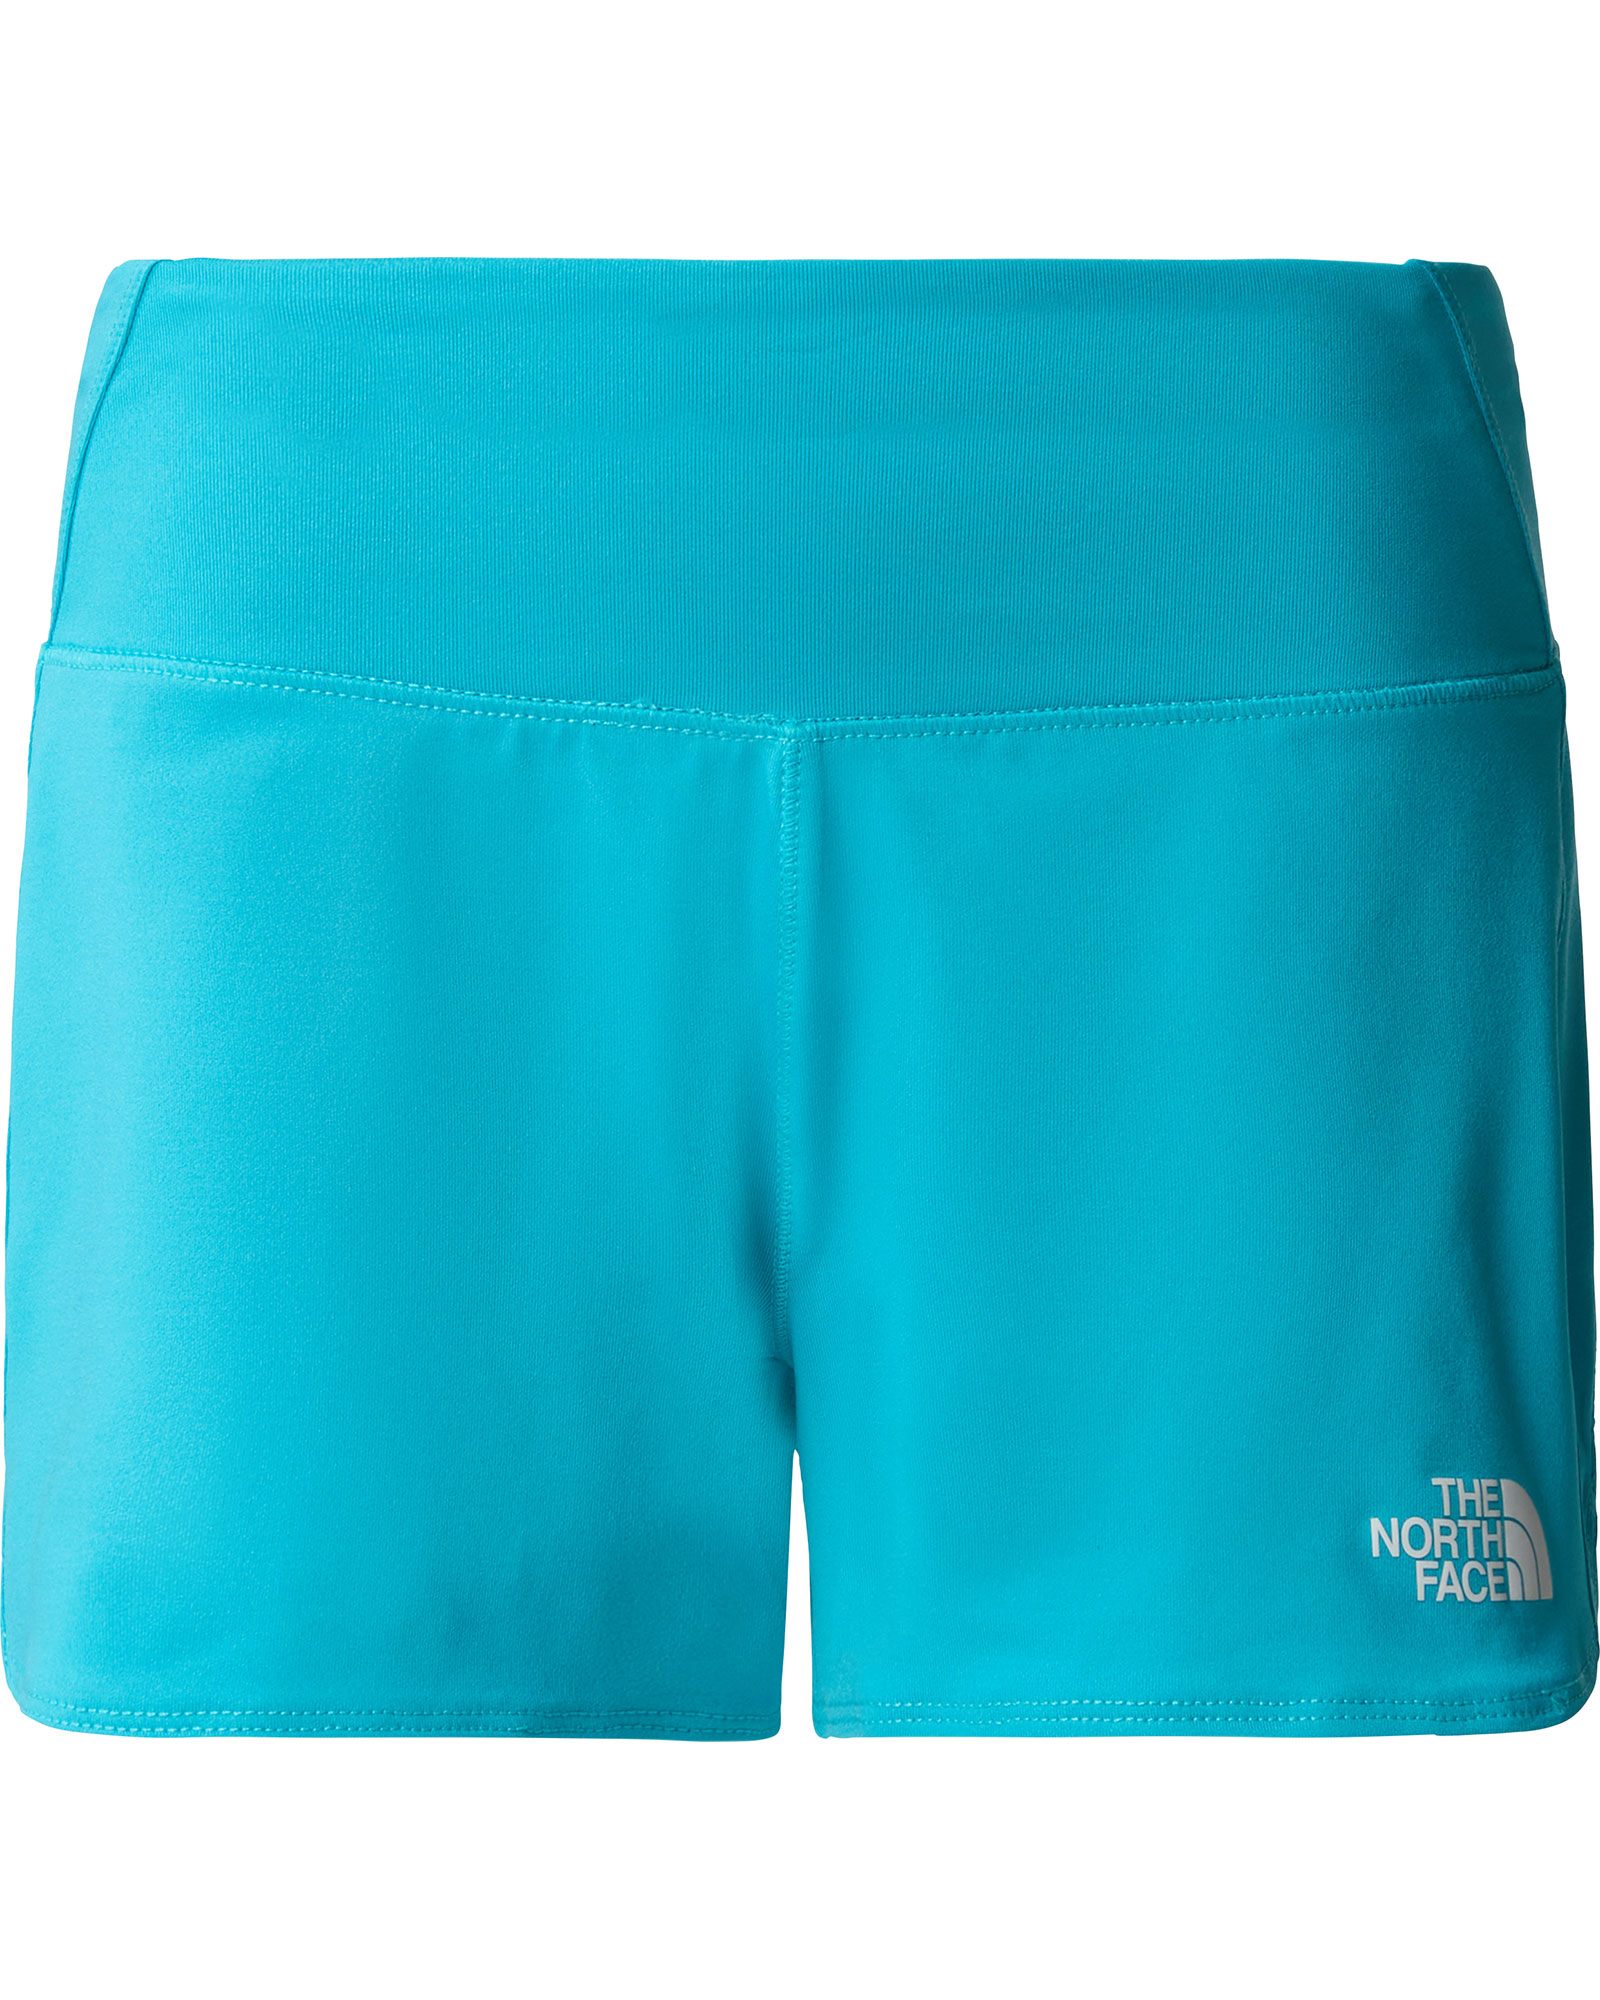 The North Face Girls Amphibious Knit Shorts